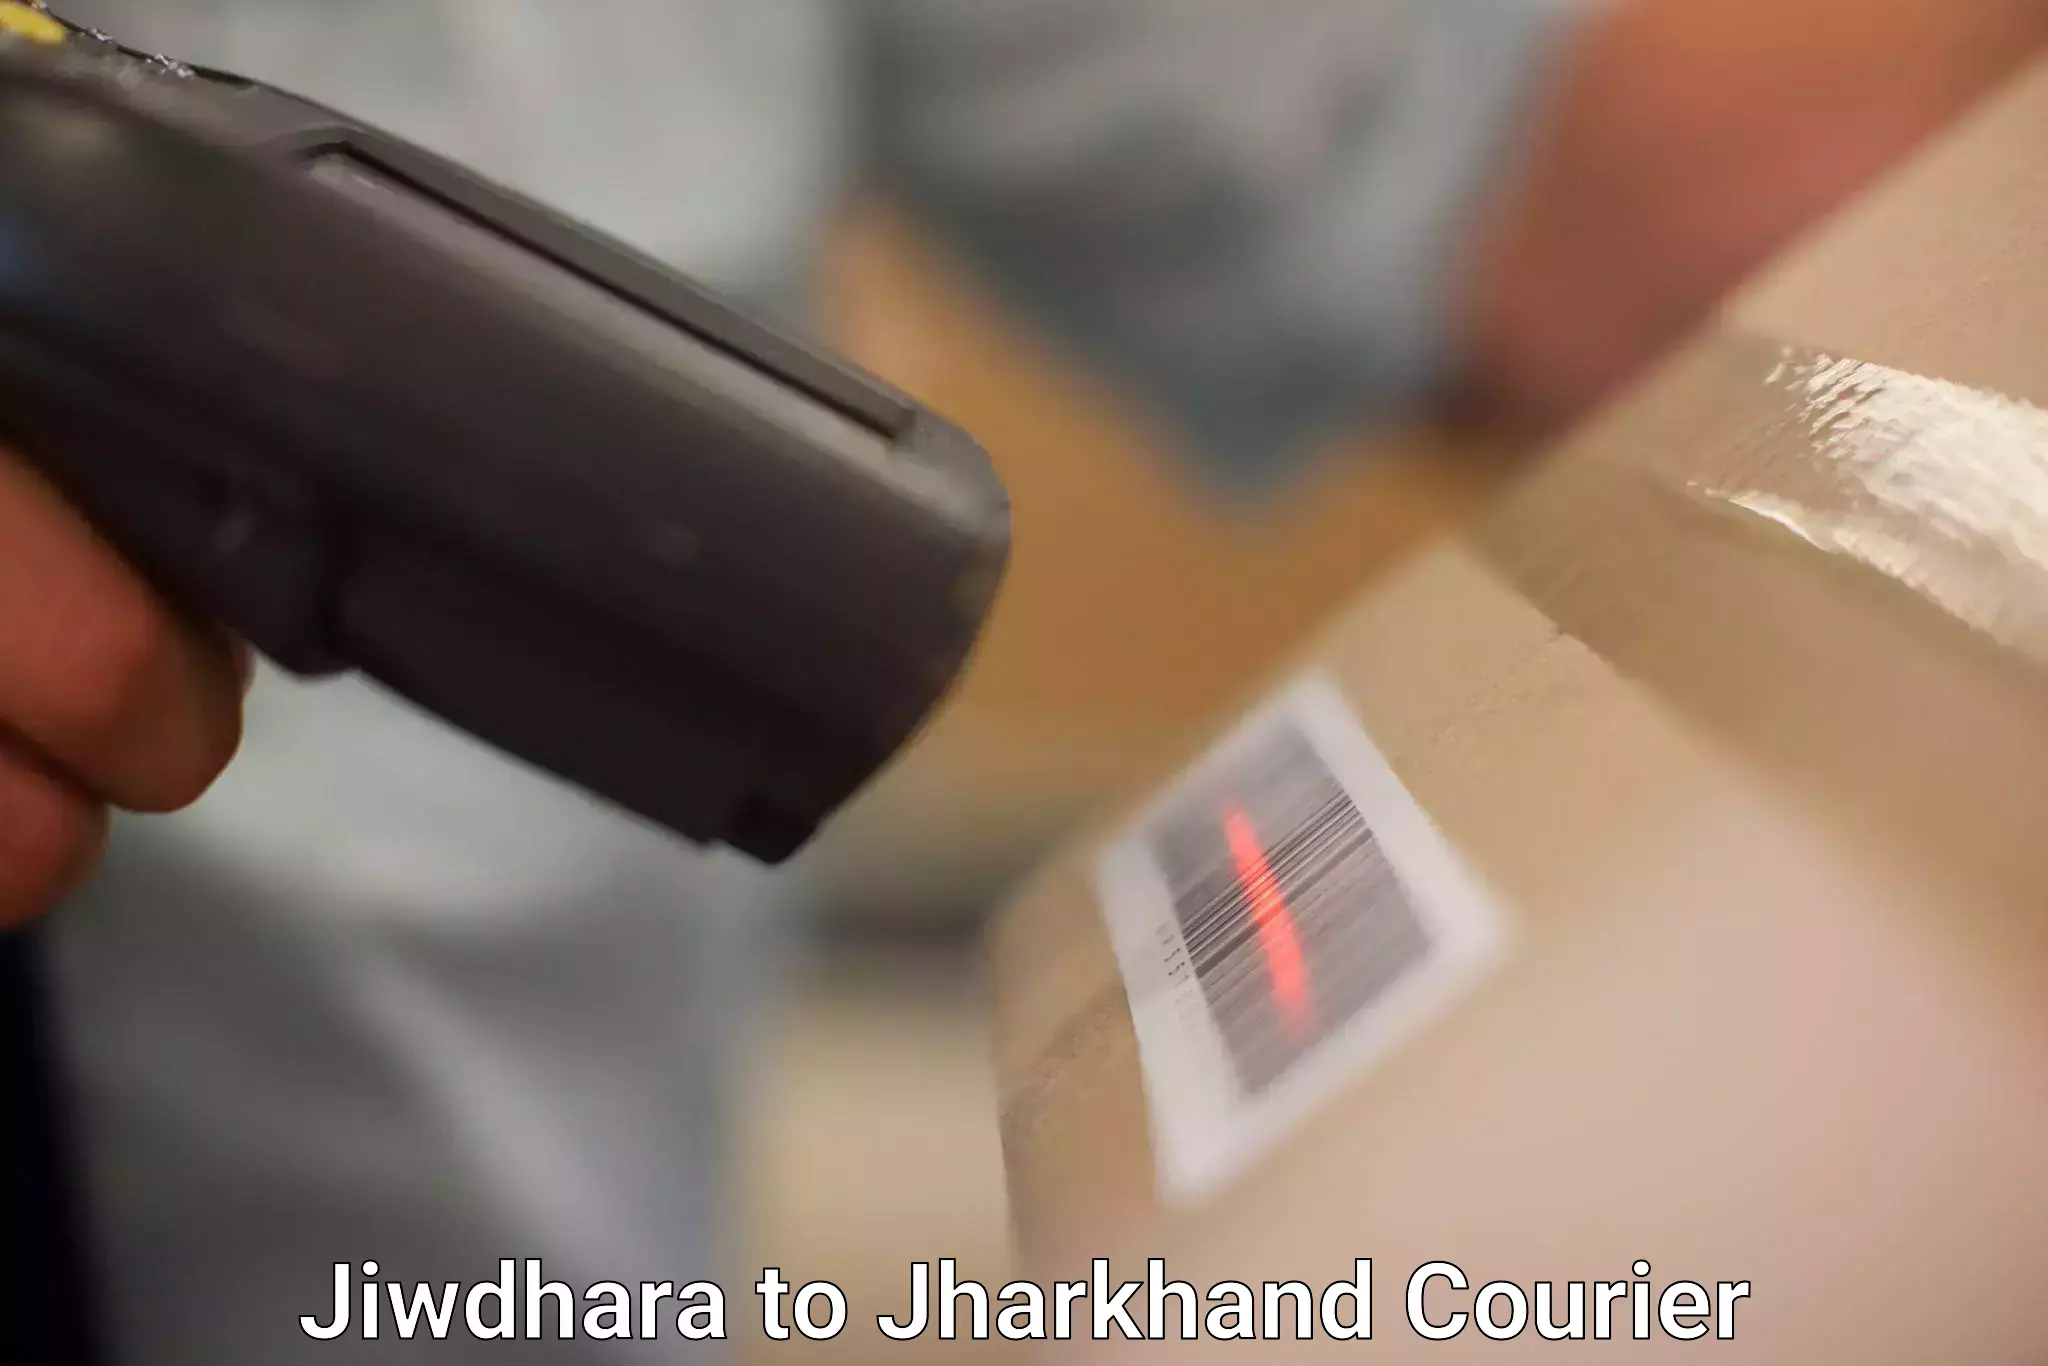 Rapid shipping services Jiwdhara to Jharkhand